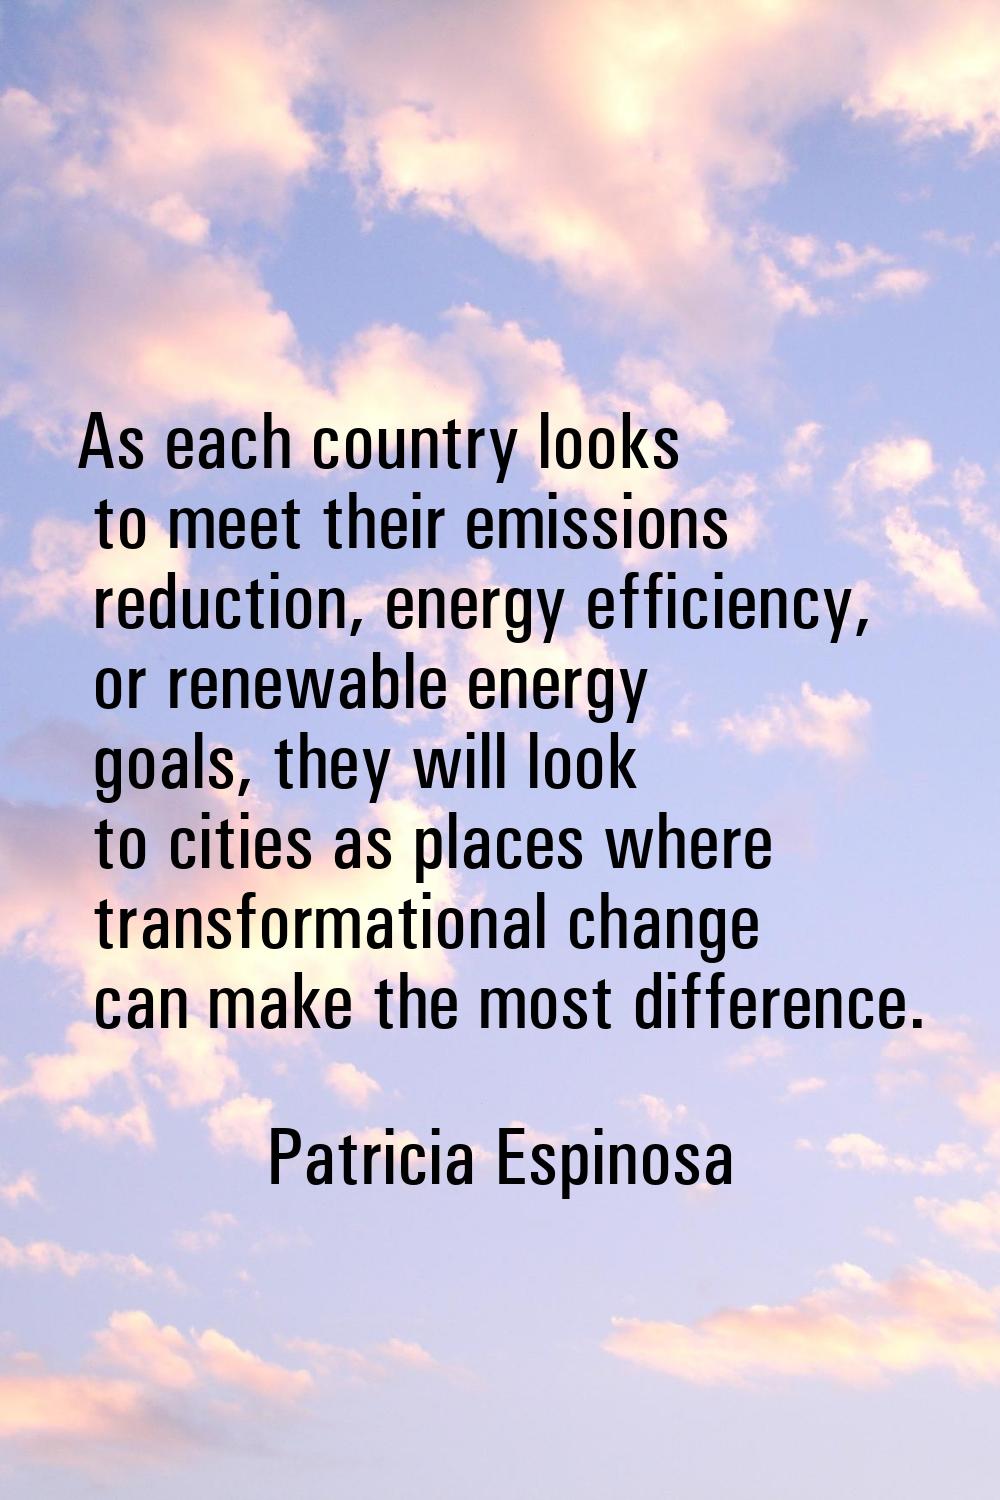 As each country looks to meet their emissions reduction, energy efficiency, or renewable energy goa